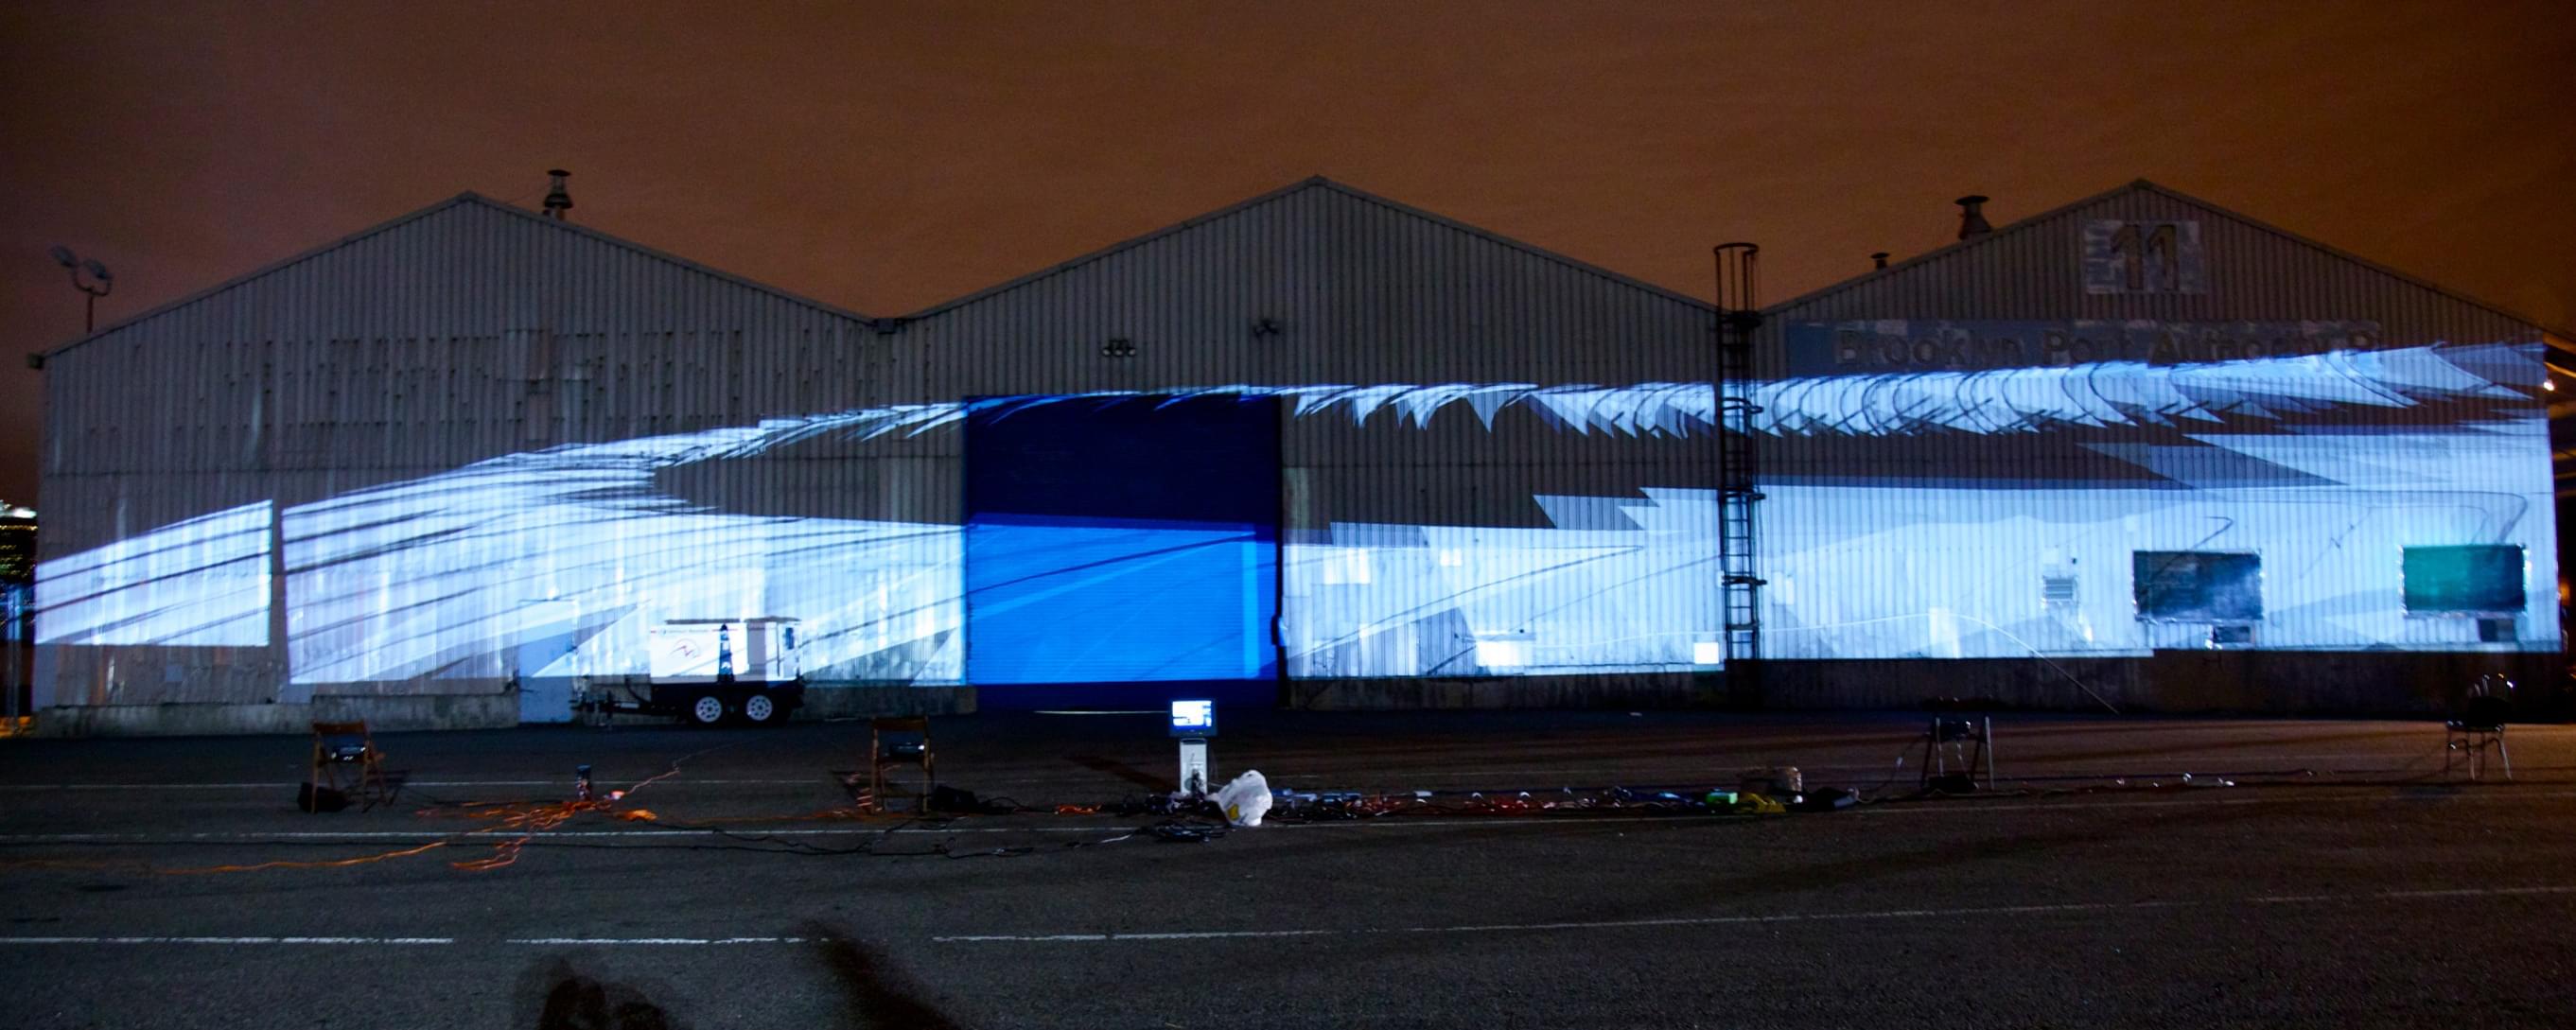 Nighttime photograph of three large warehouses, each with a triangular house-like top, with a large, 200+ foot projection of what looks like a series of graphically designed white sails following each other around a circular loop.